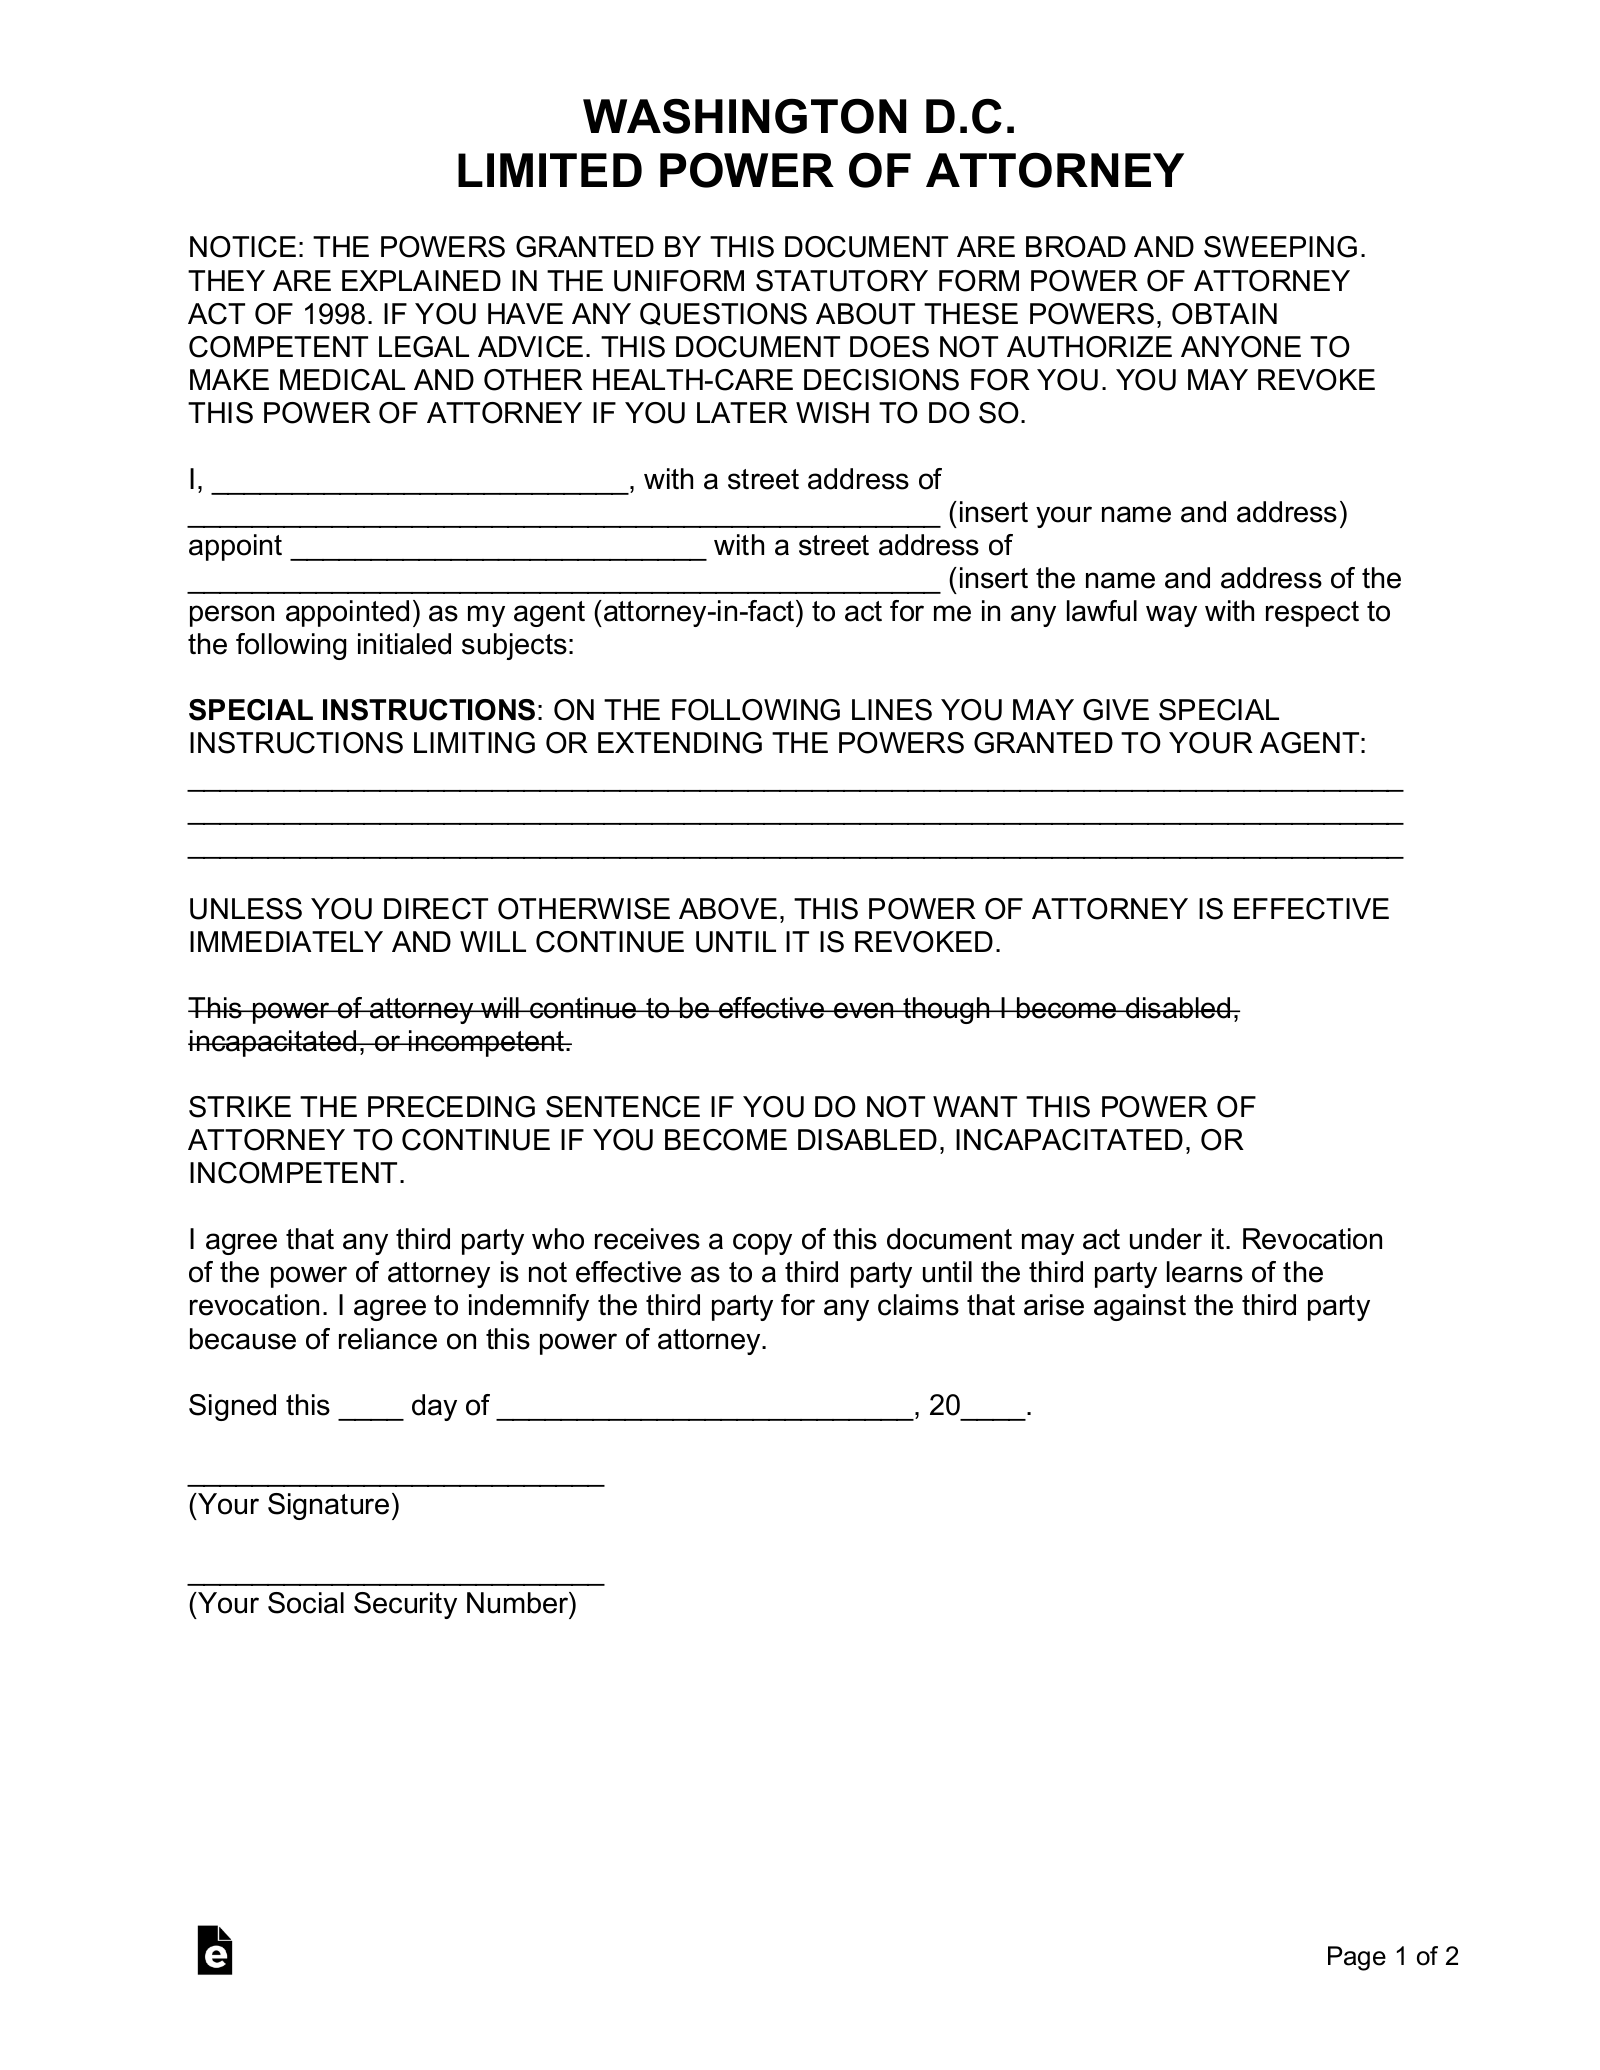 Washington D.C. Limited Power of Attorney Form